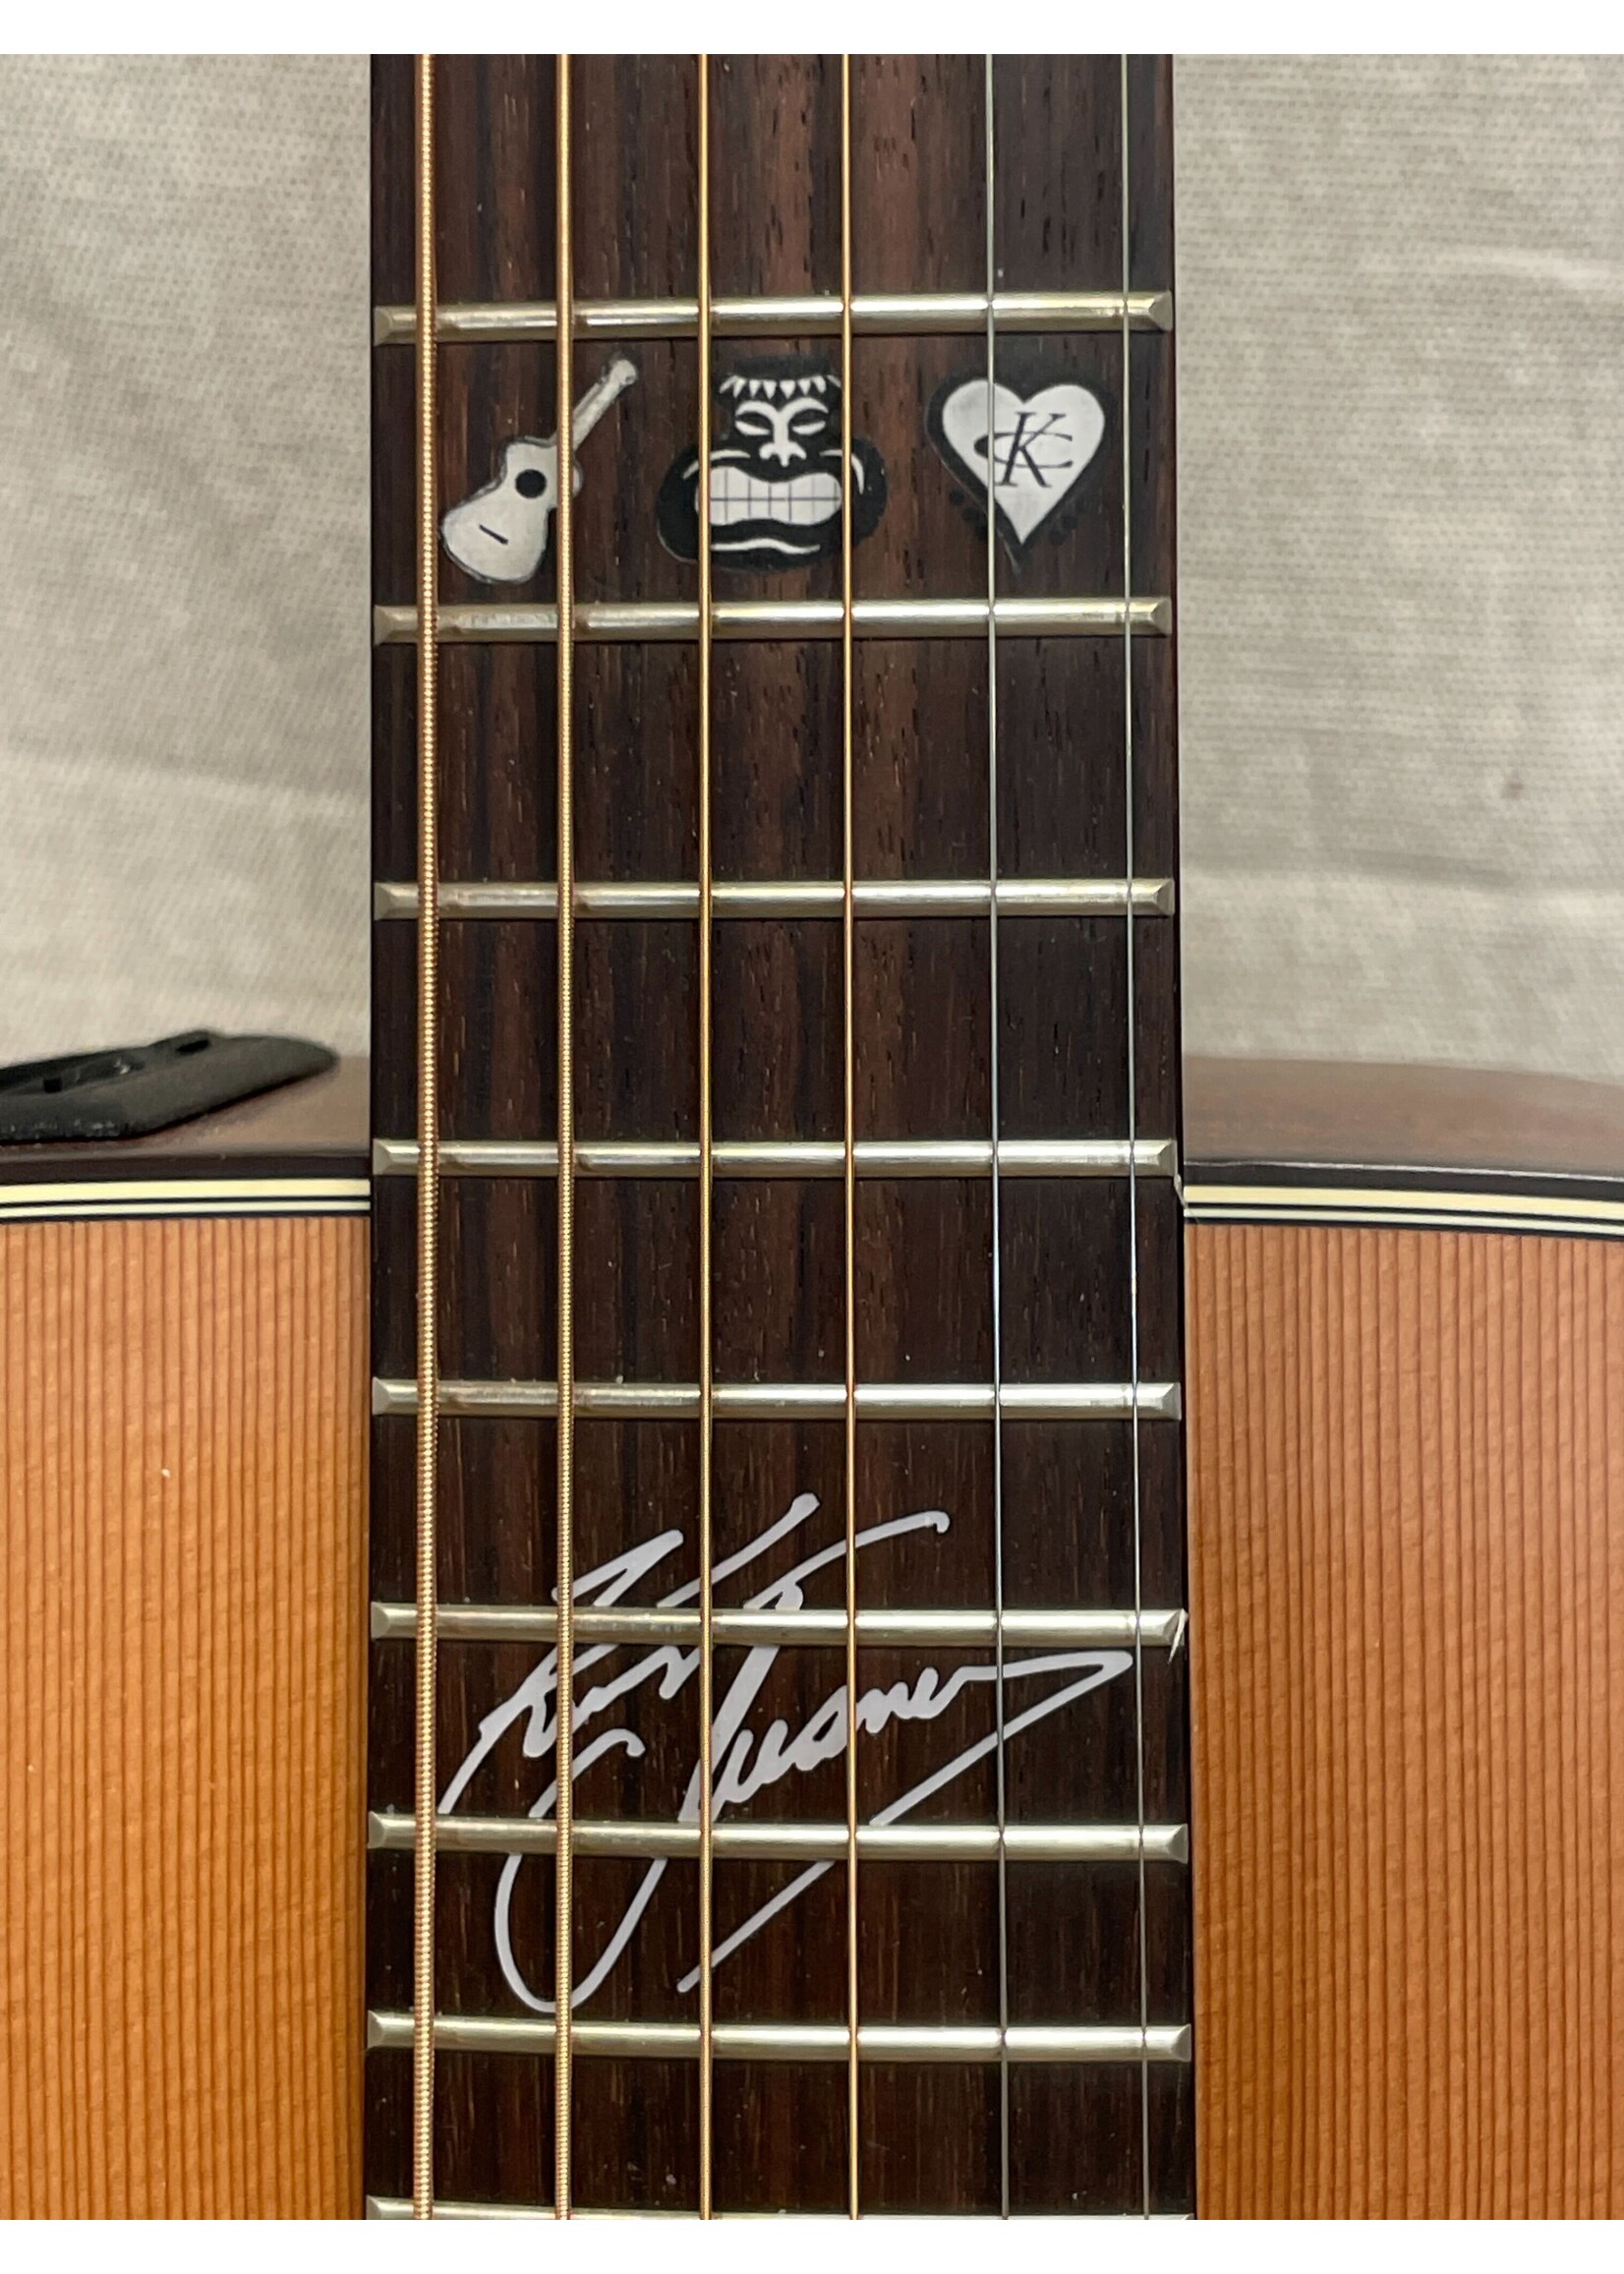 Takamine Takamine KC70 Signature Series Kenny Chesney Model OM Acoustic/Electric Guitar 2010s - Natural